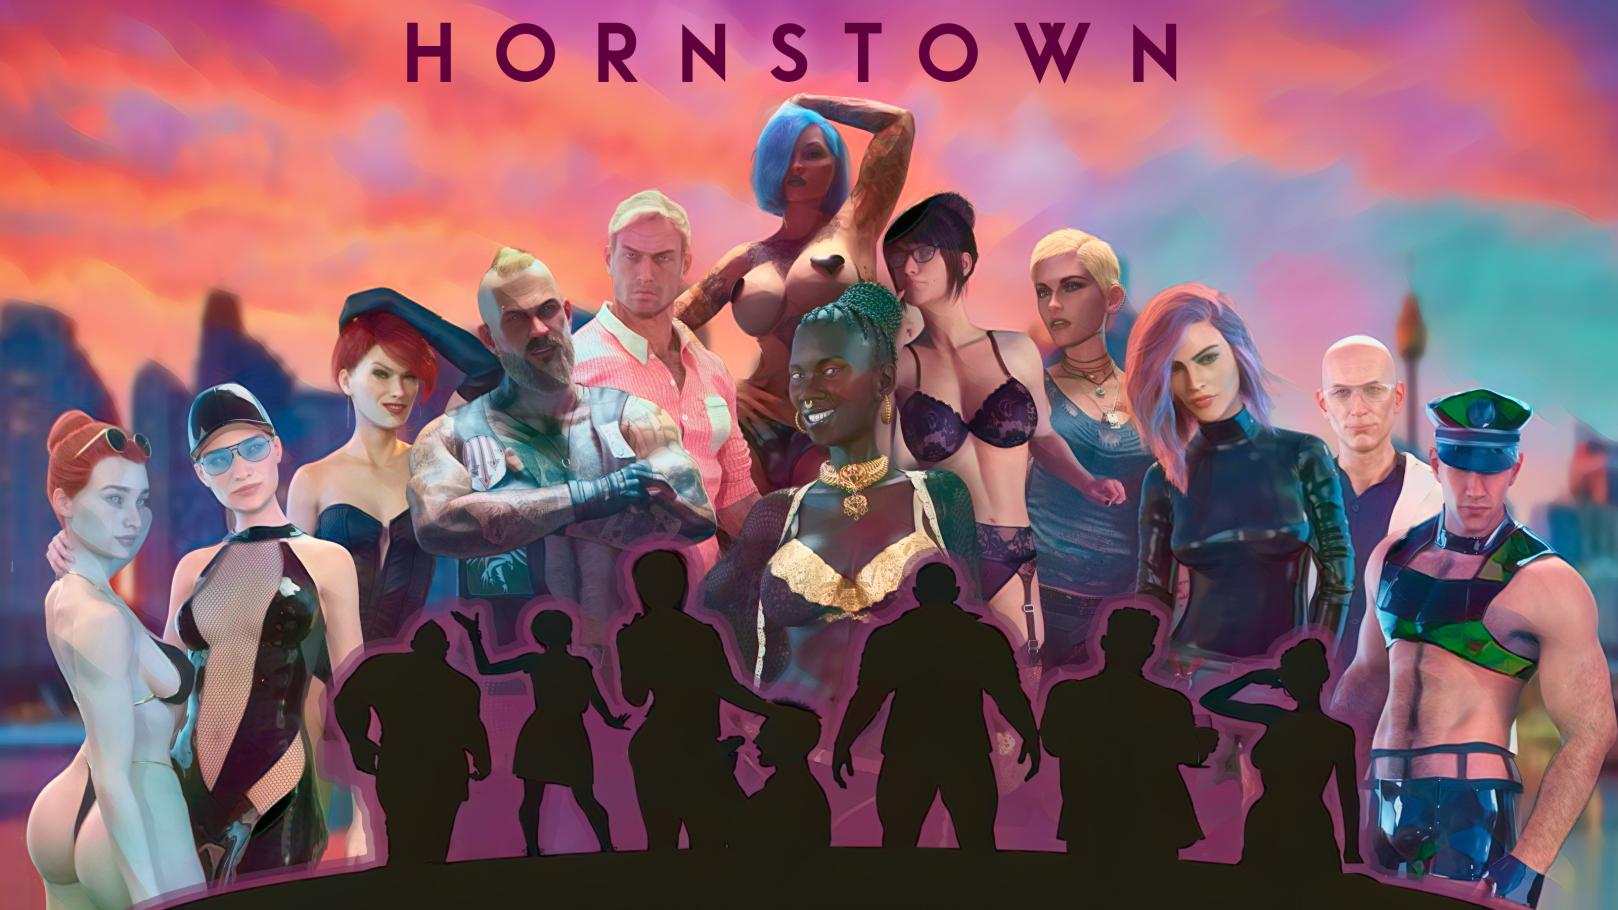 Hard times in hornstown porn game